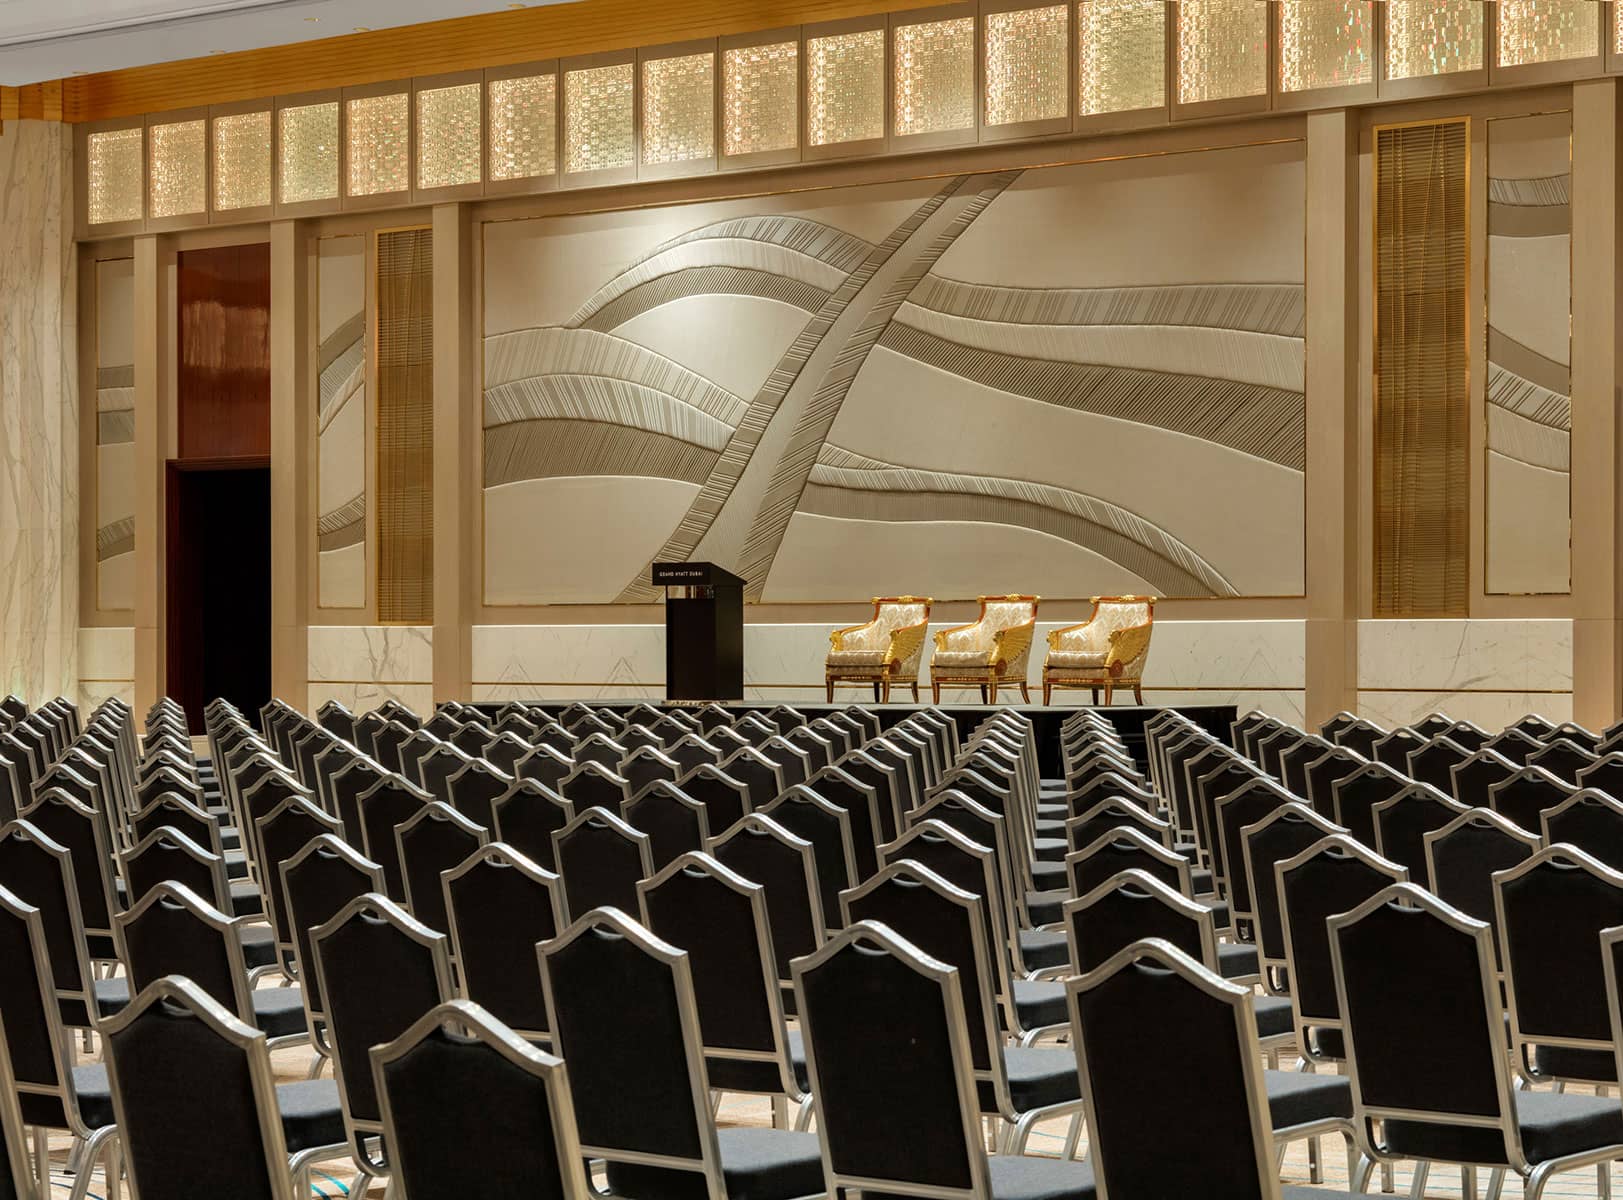 MICE Photography: Meeting + Conference Theatre style set-up